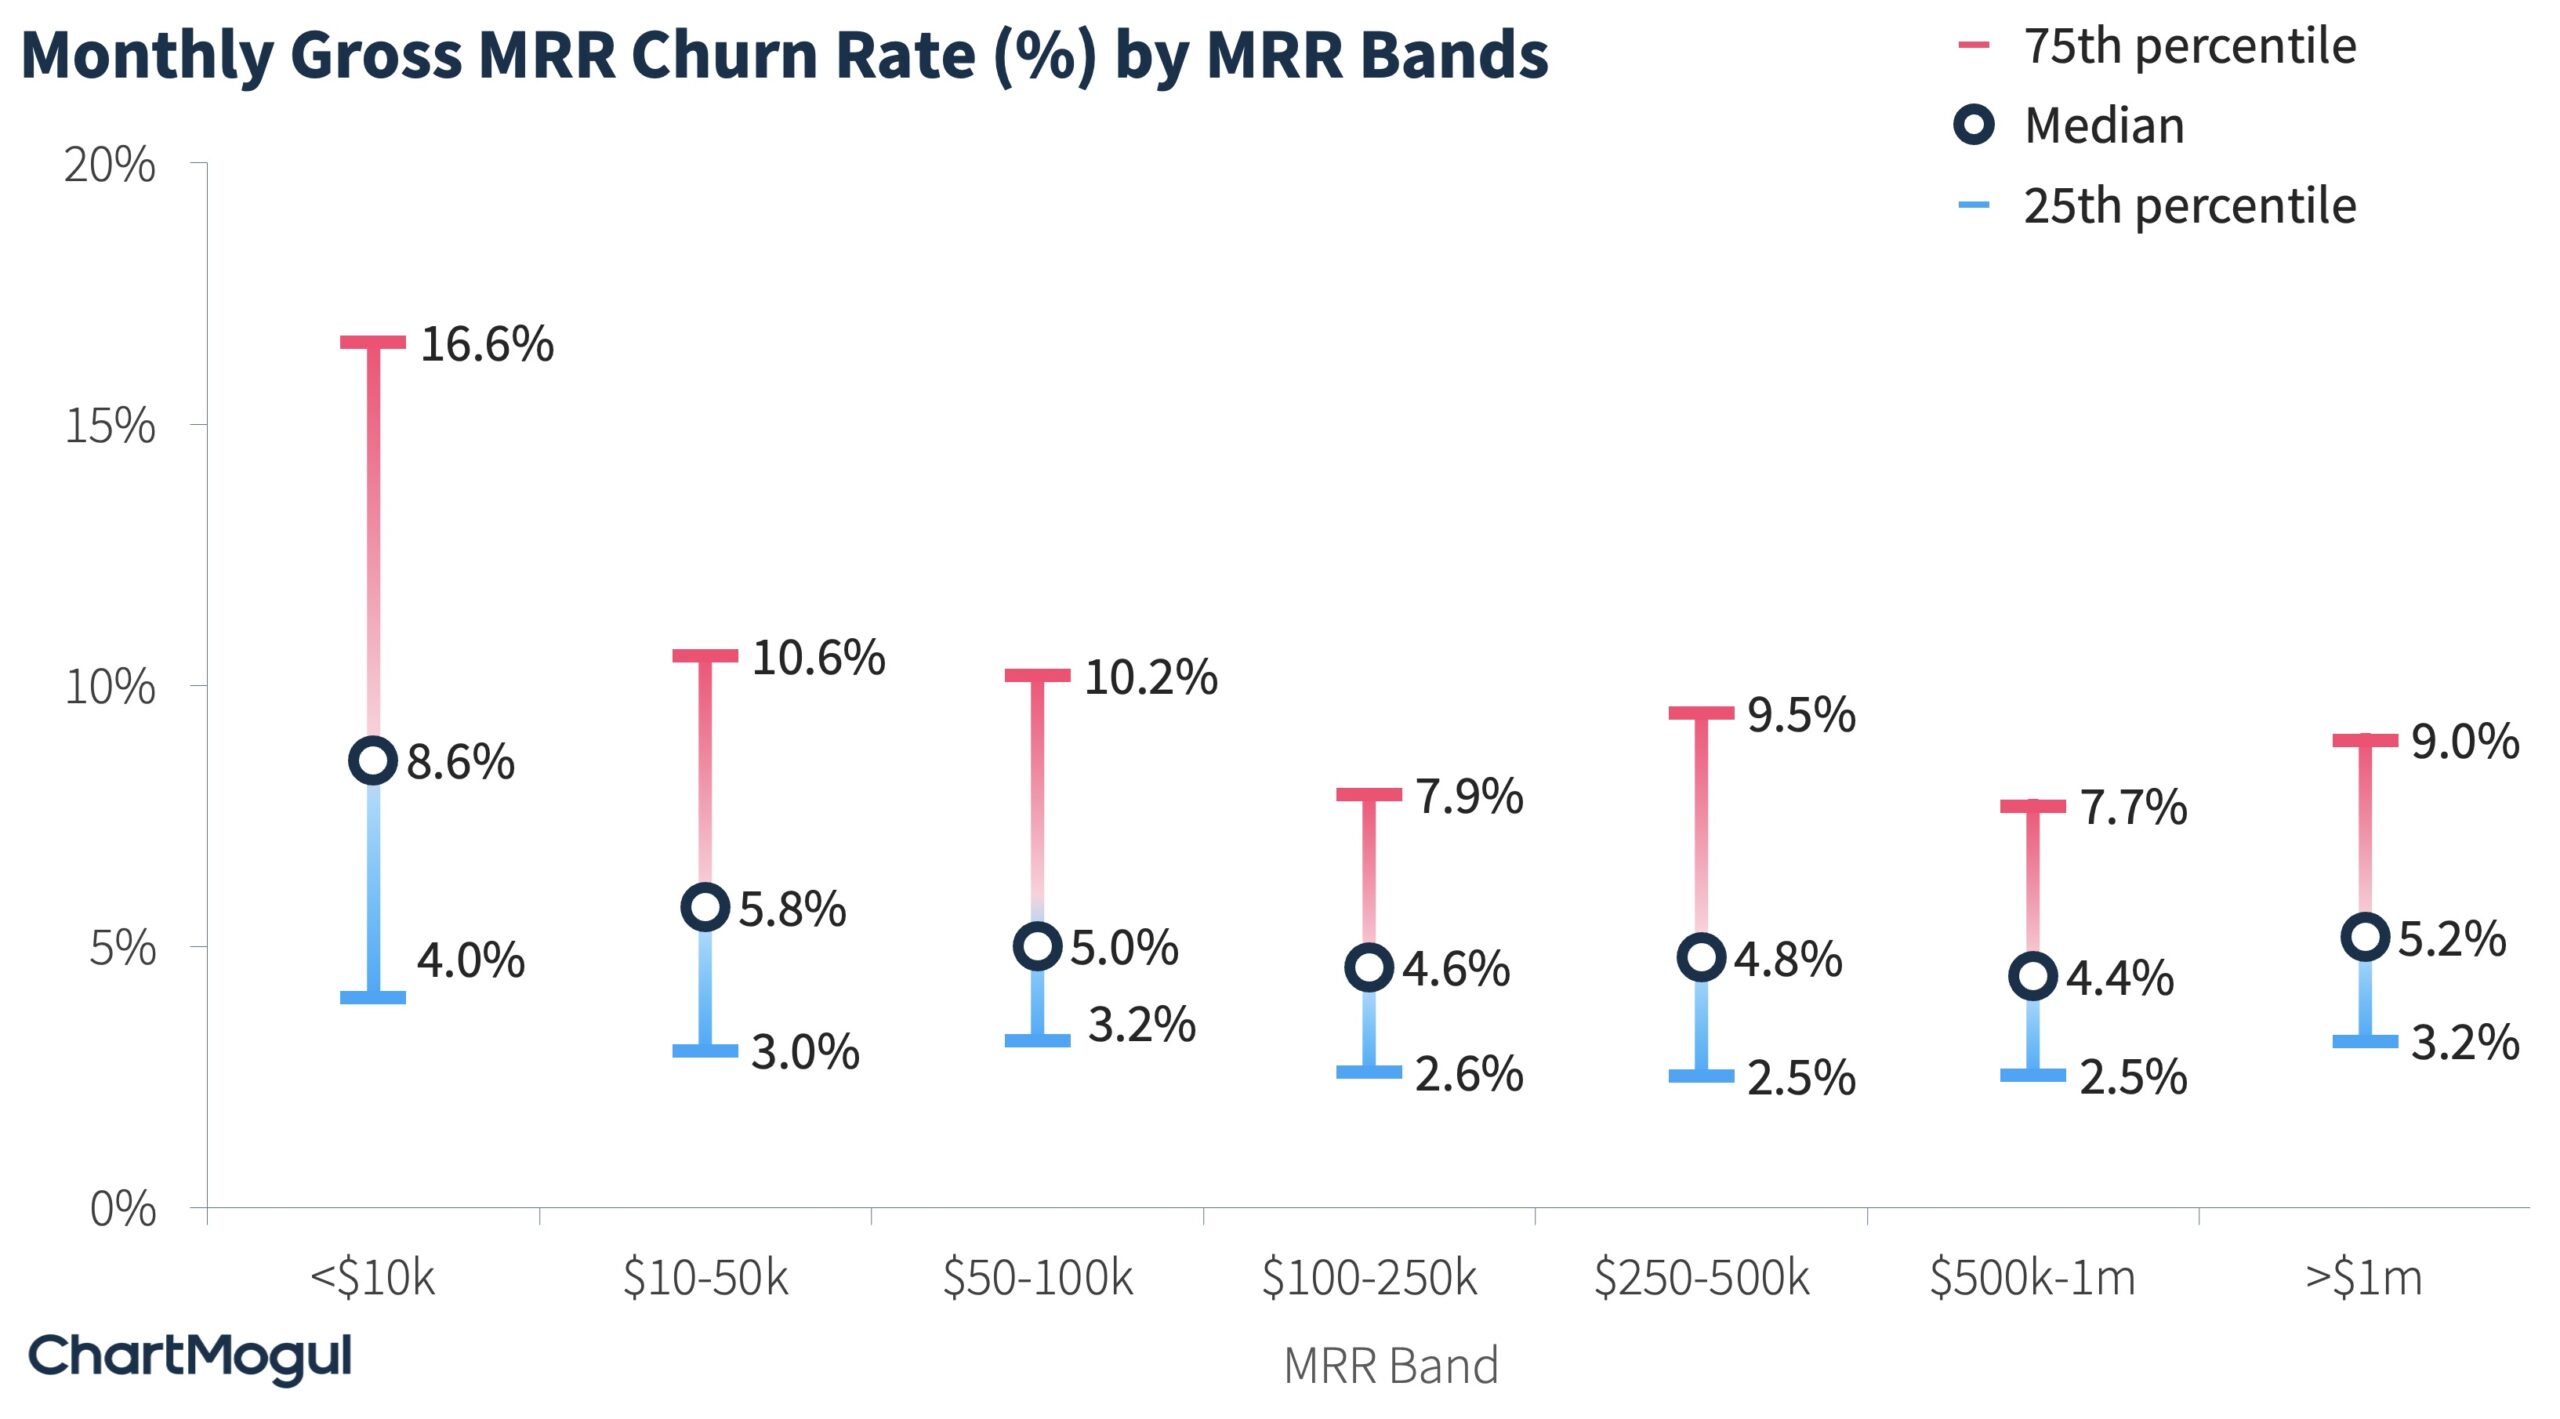 Monthly Gross MRR Percentiles by MRR Band